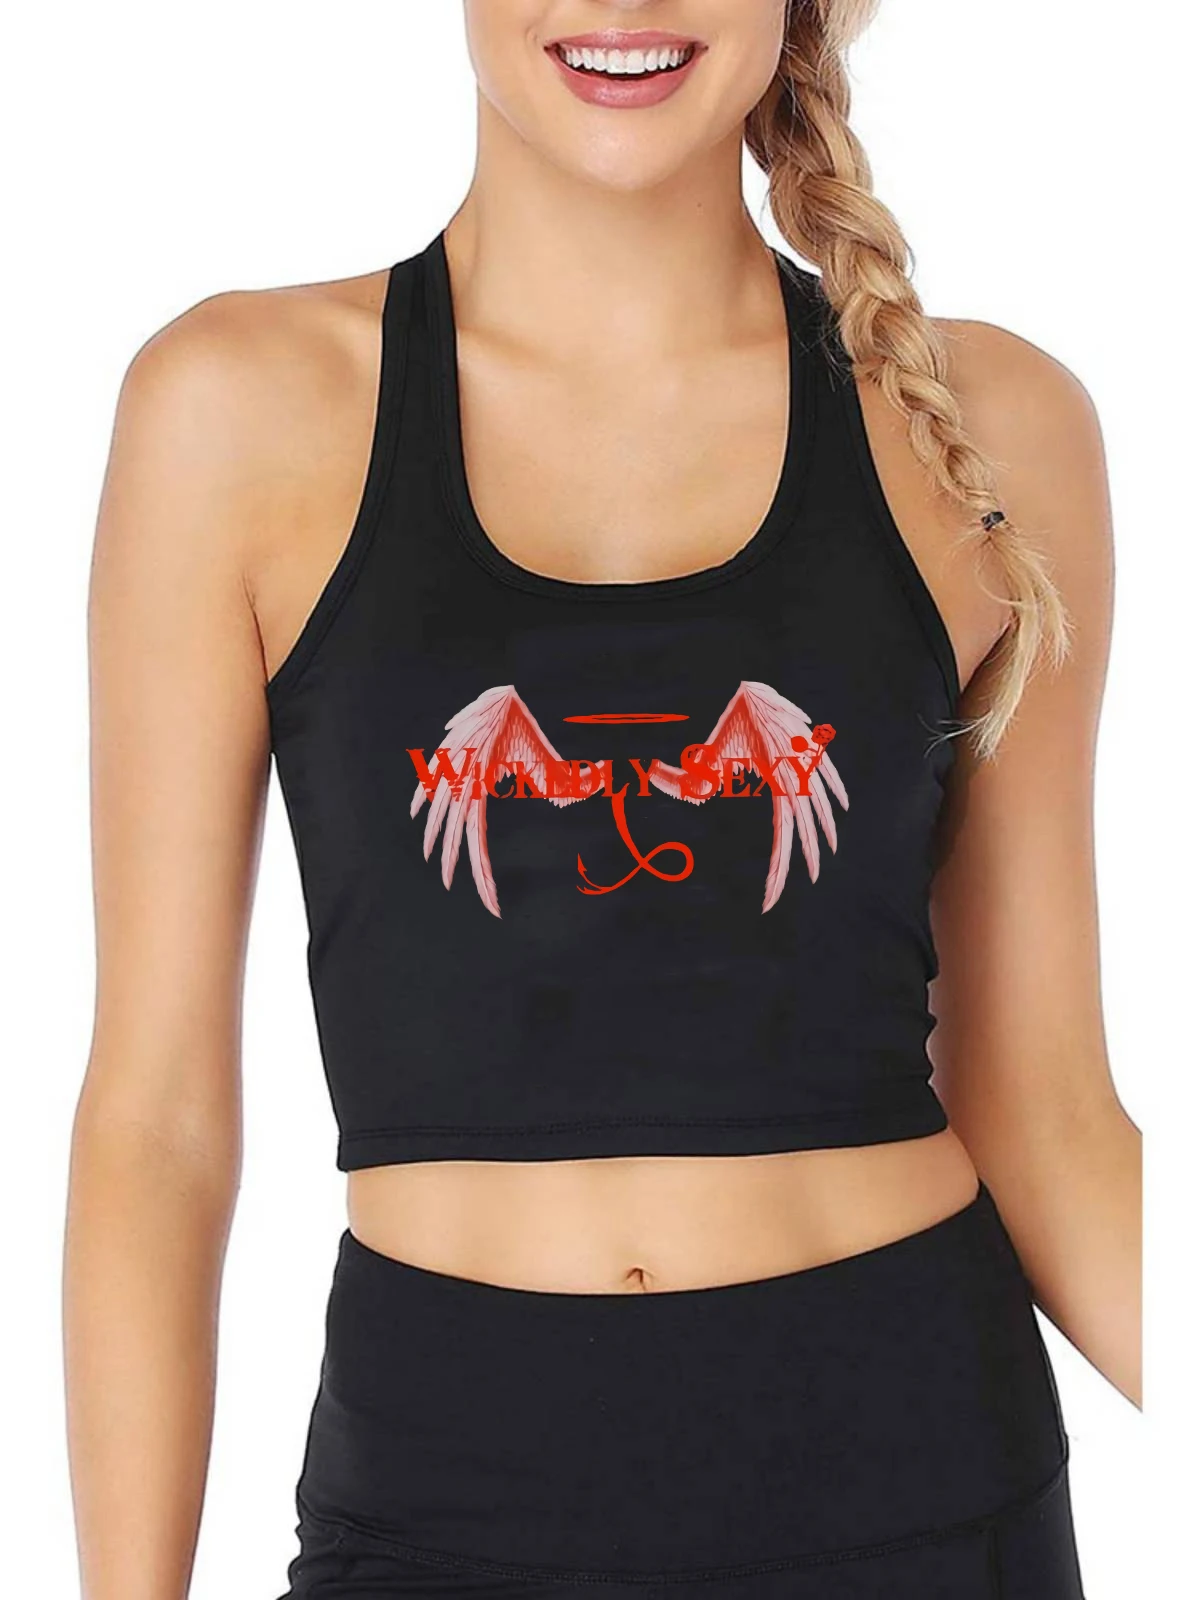 

Wickedly Sexy Red Wing Graphic Design Slim Fit Crop Top Hotwife Naughty Personalized Tank Tops Gothic Camisole